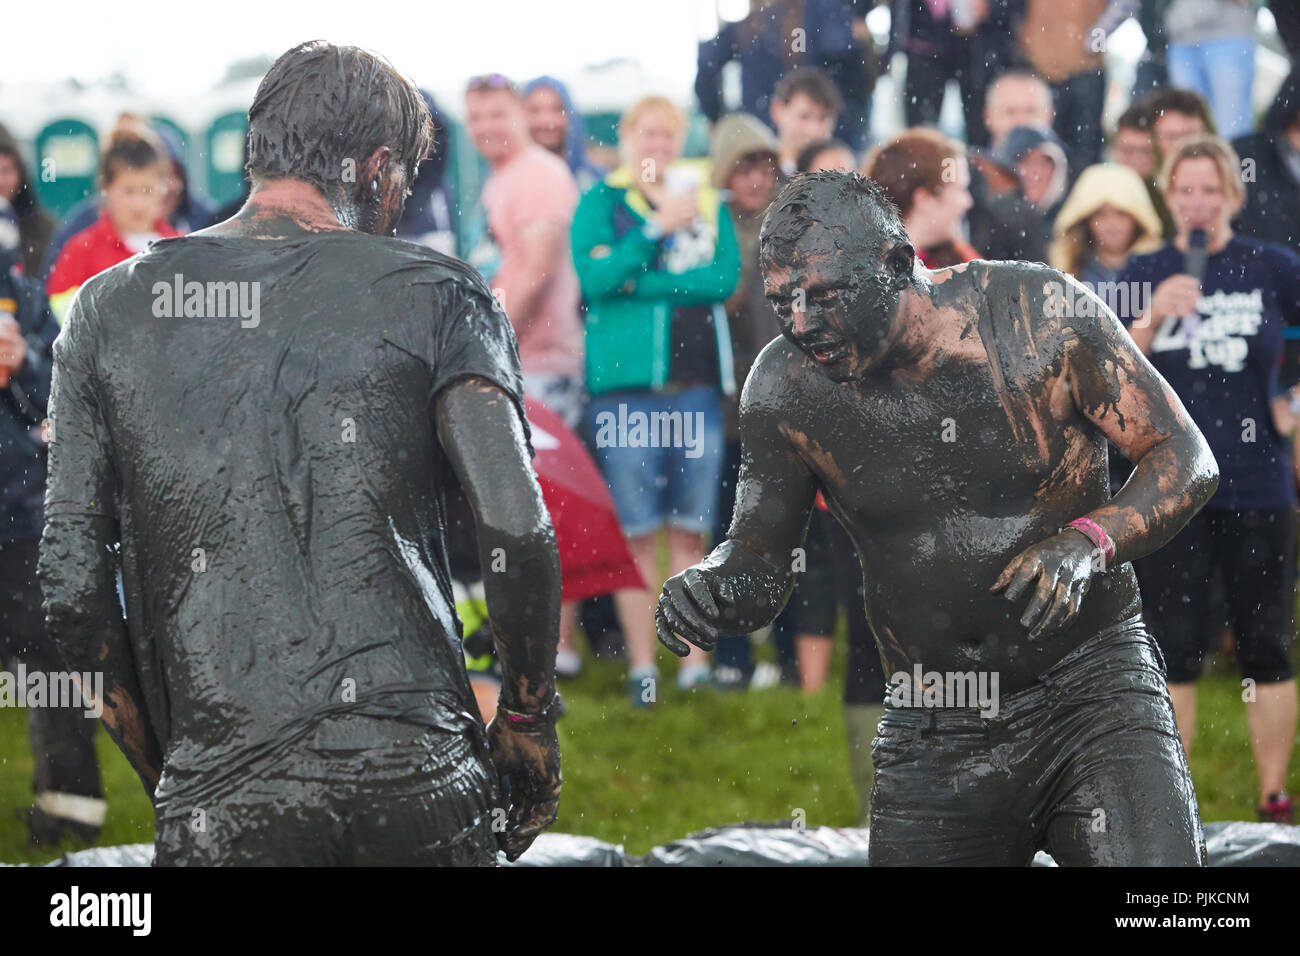 Two men mud wrestling with a crowd behind at The Lowland Games, Thorney, Somerset, England Stock Photo